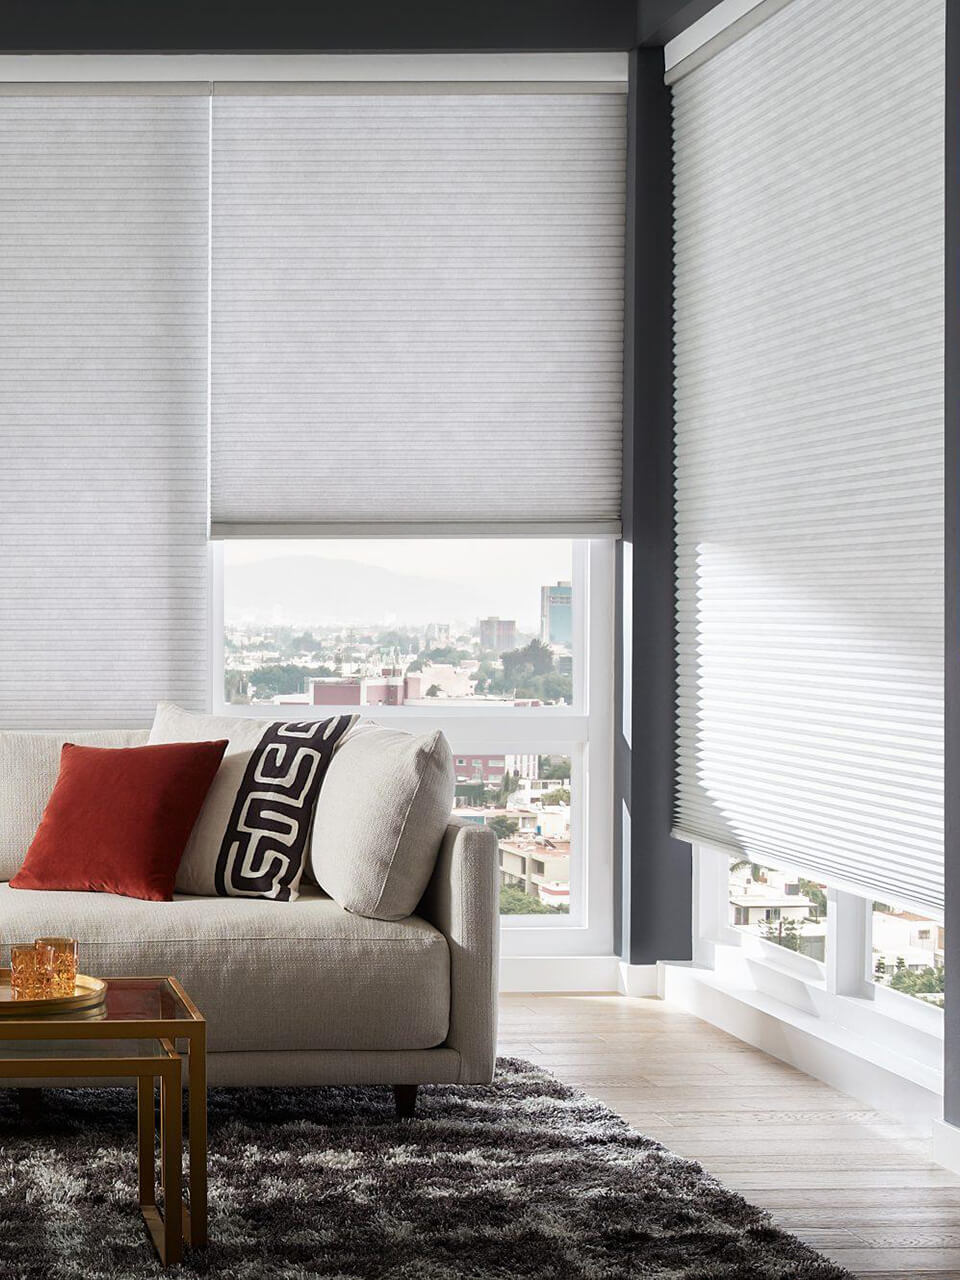 The corner of a living room with white honeycomb shades half-covering the tall windows.